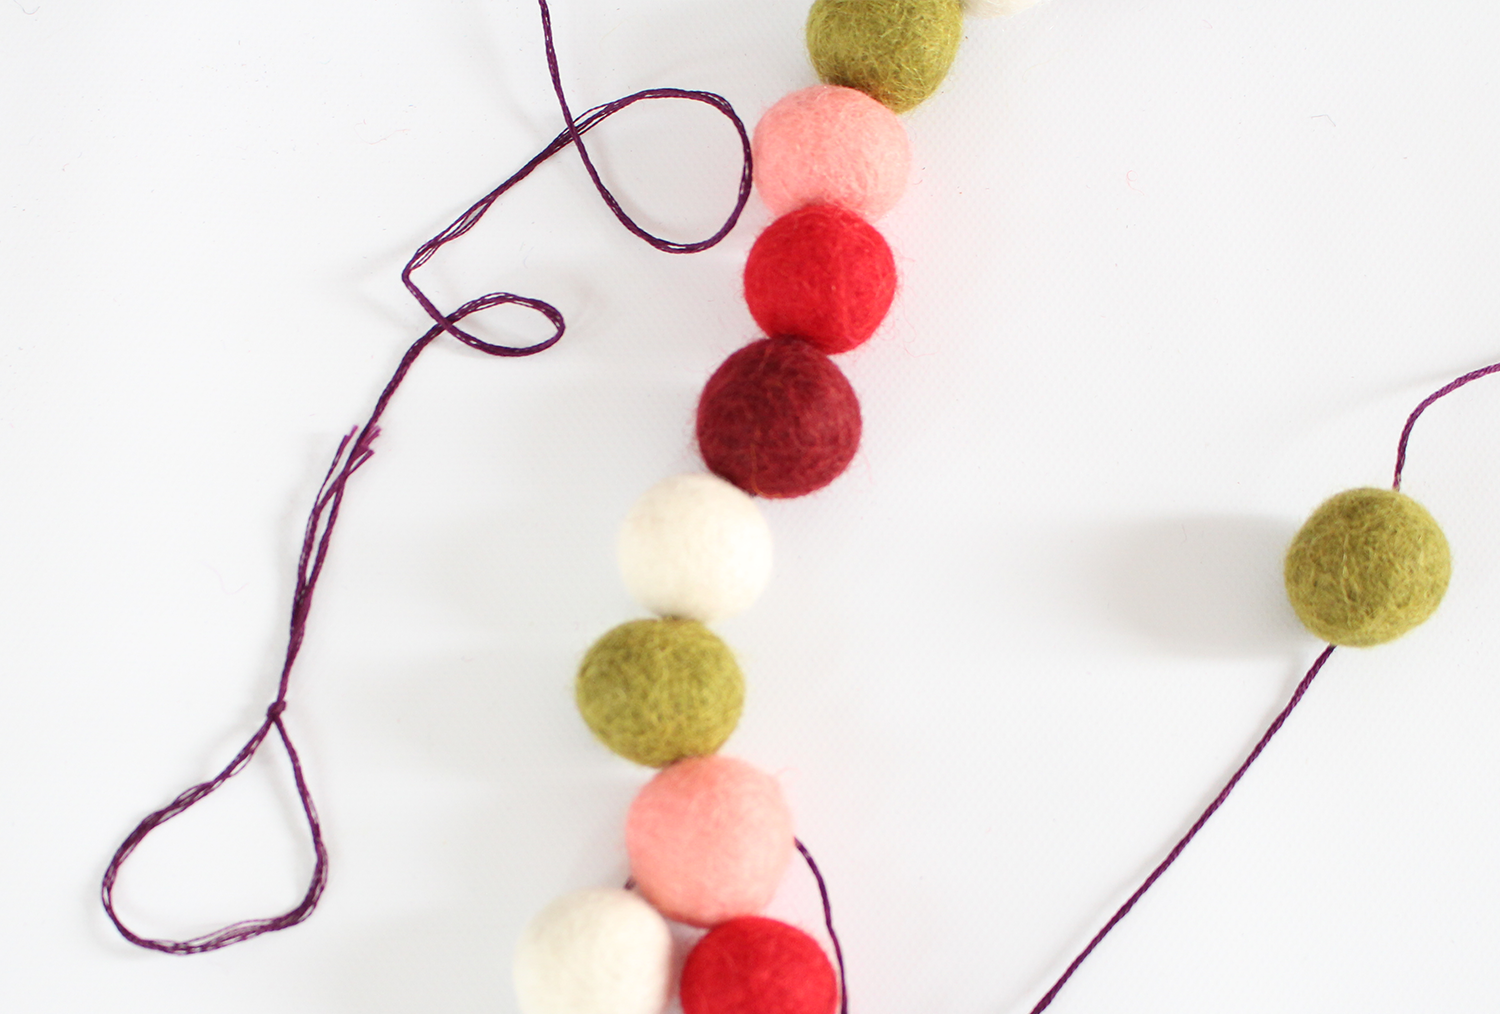 DIY felt ball garlands are easy to make for your holiday mantel decorating